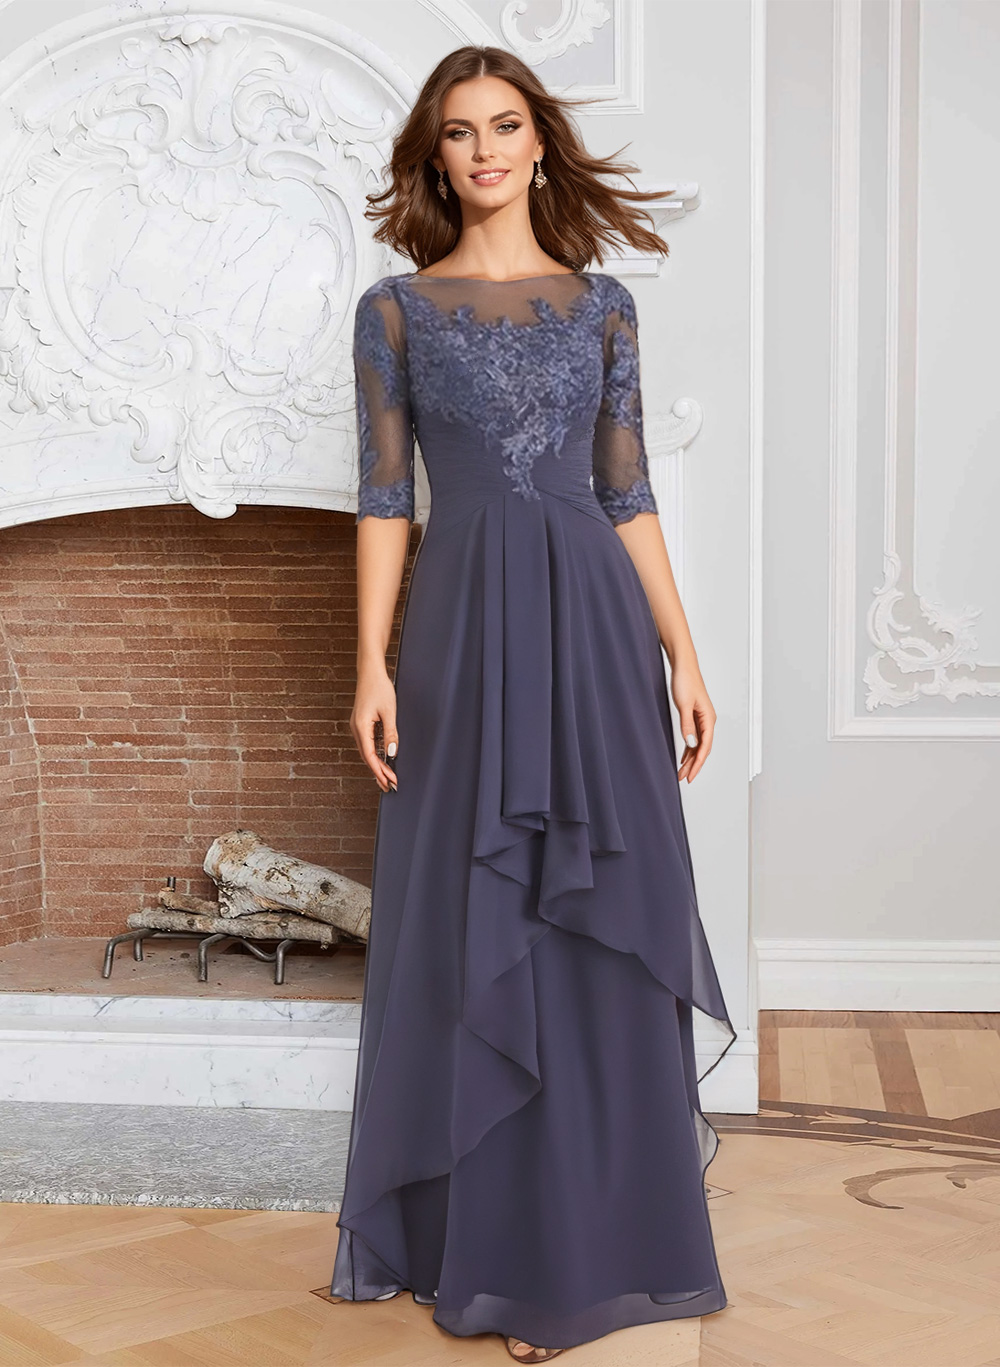 A-Line Illusion Neck 1/2 Sleeves Chiffon Mother Of The Bride Dresses With Cascading Ruffles